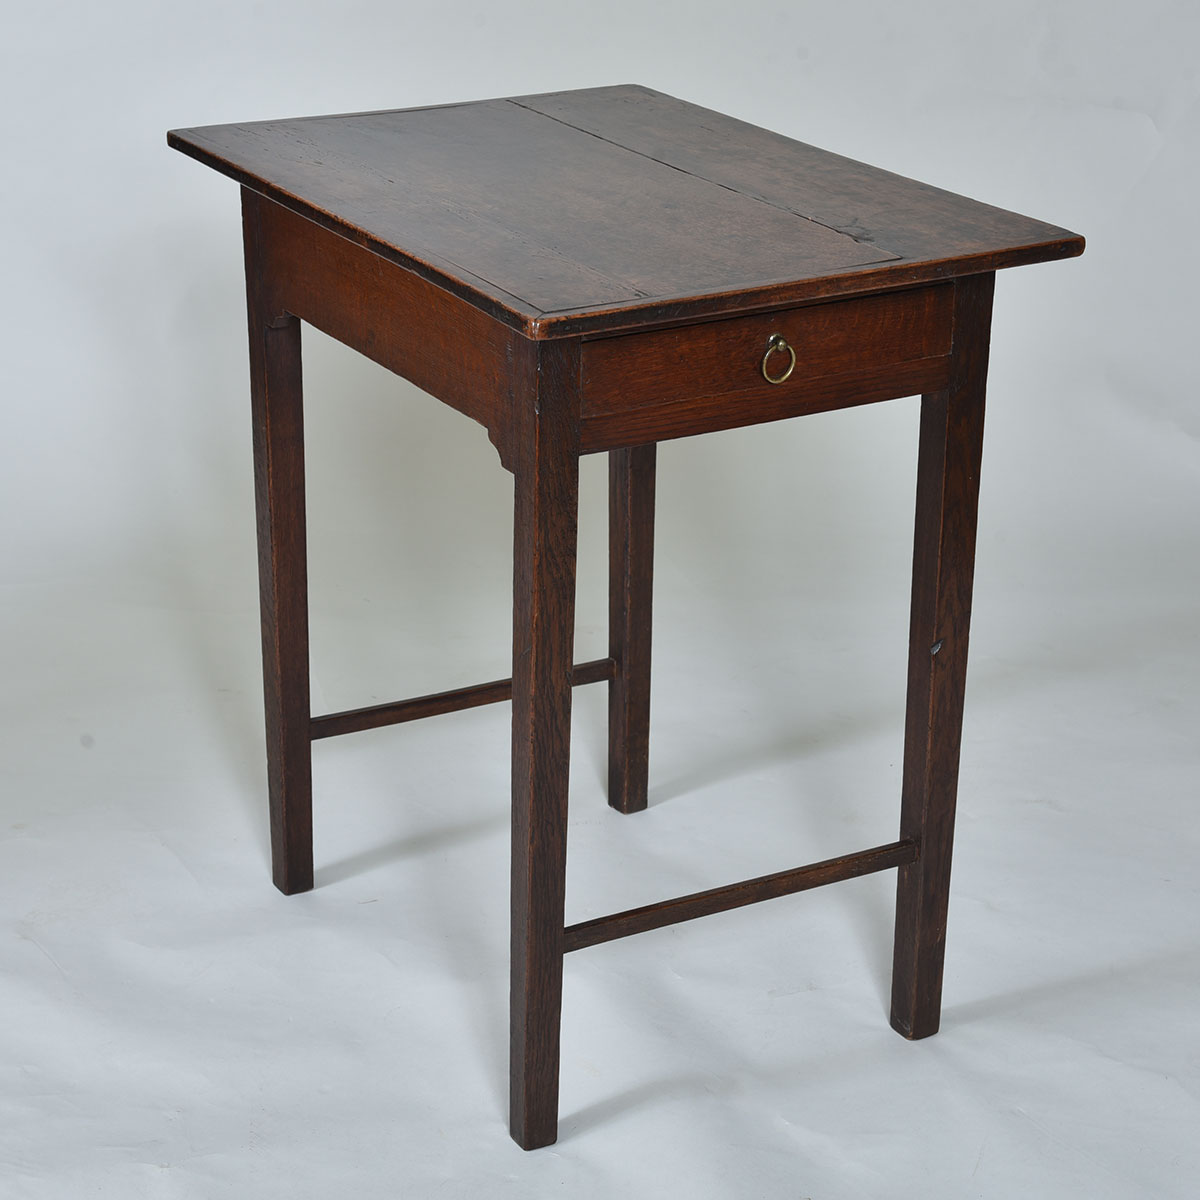 18th century Small Oak Side Table Elaine Phillips Antiques